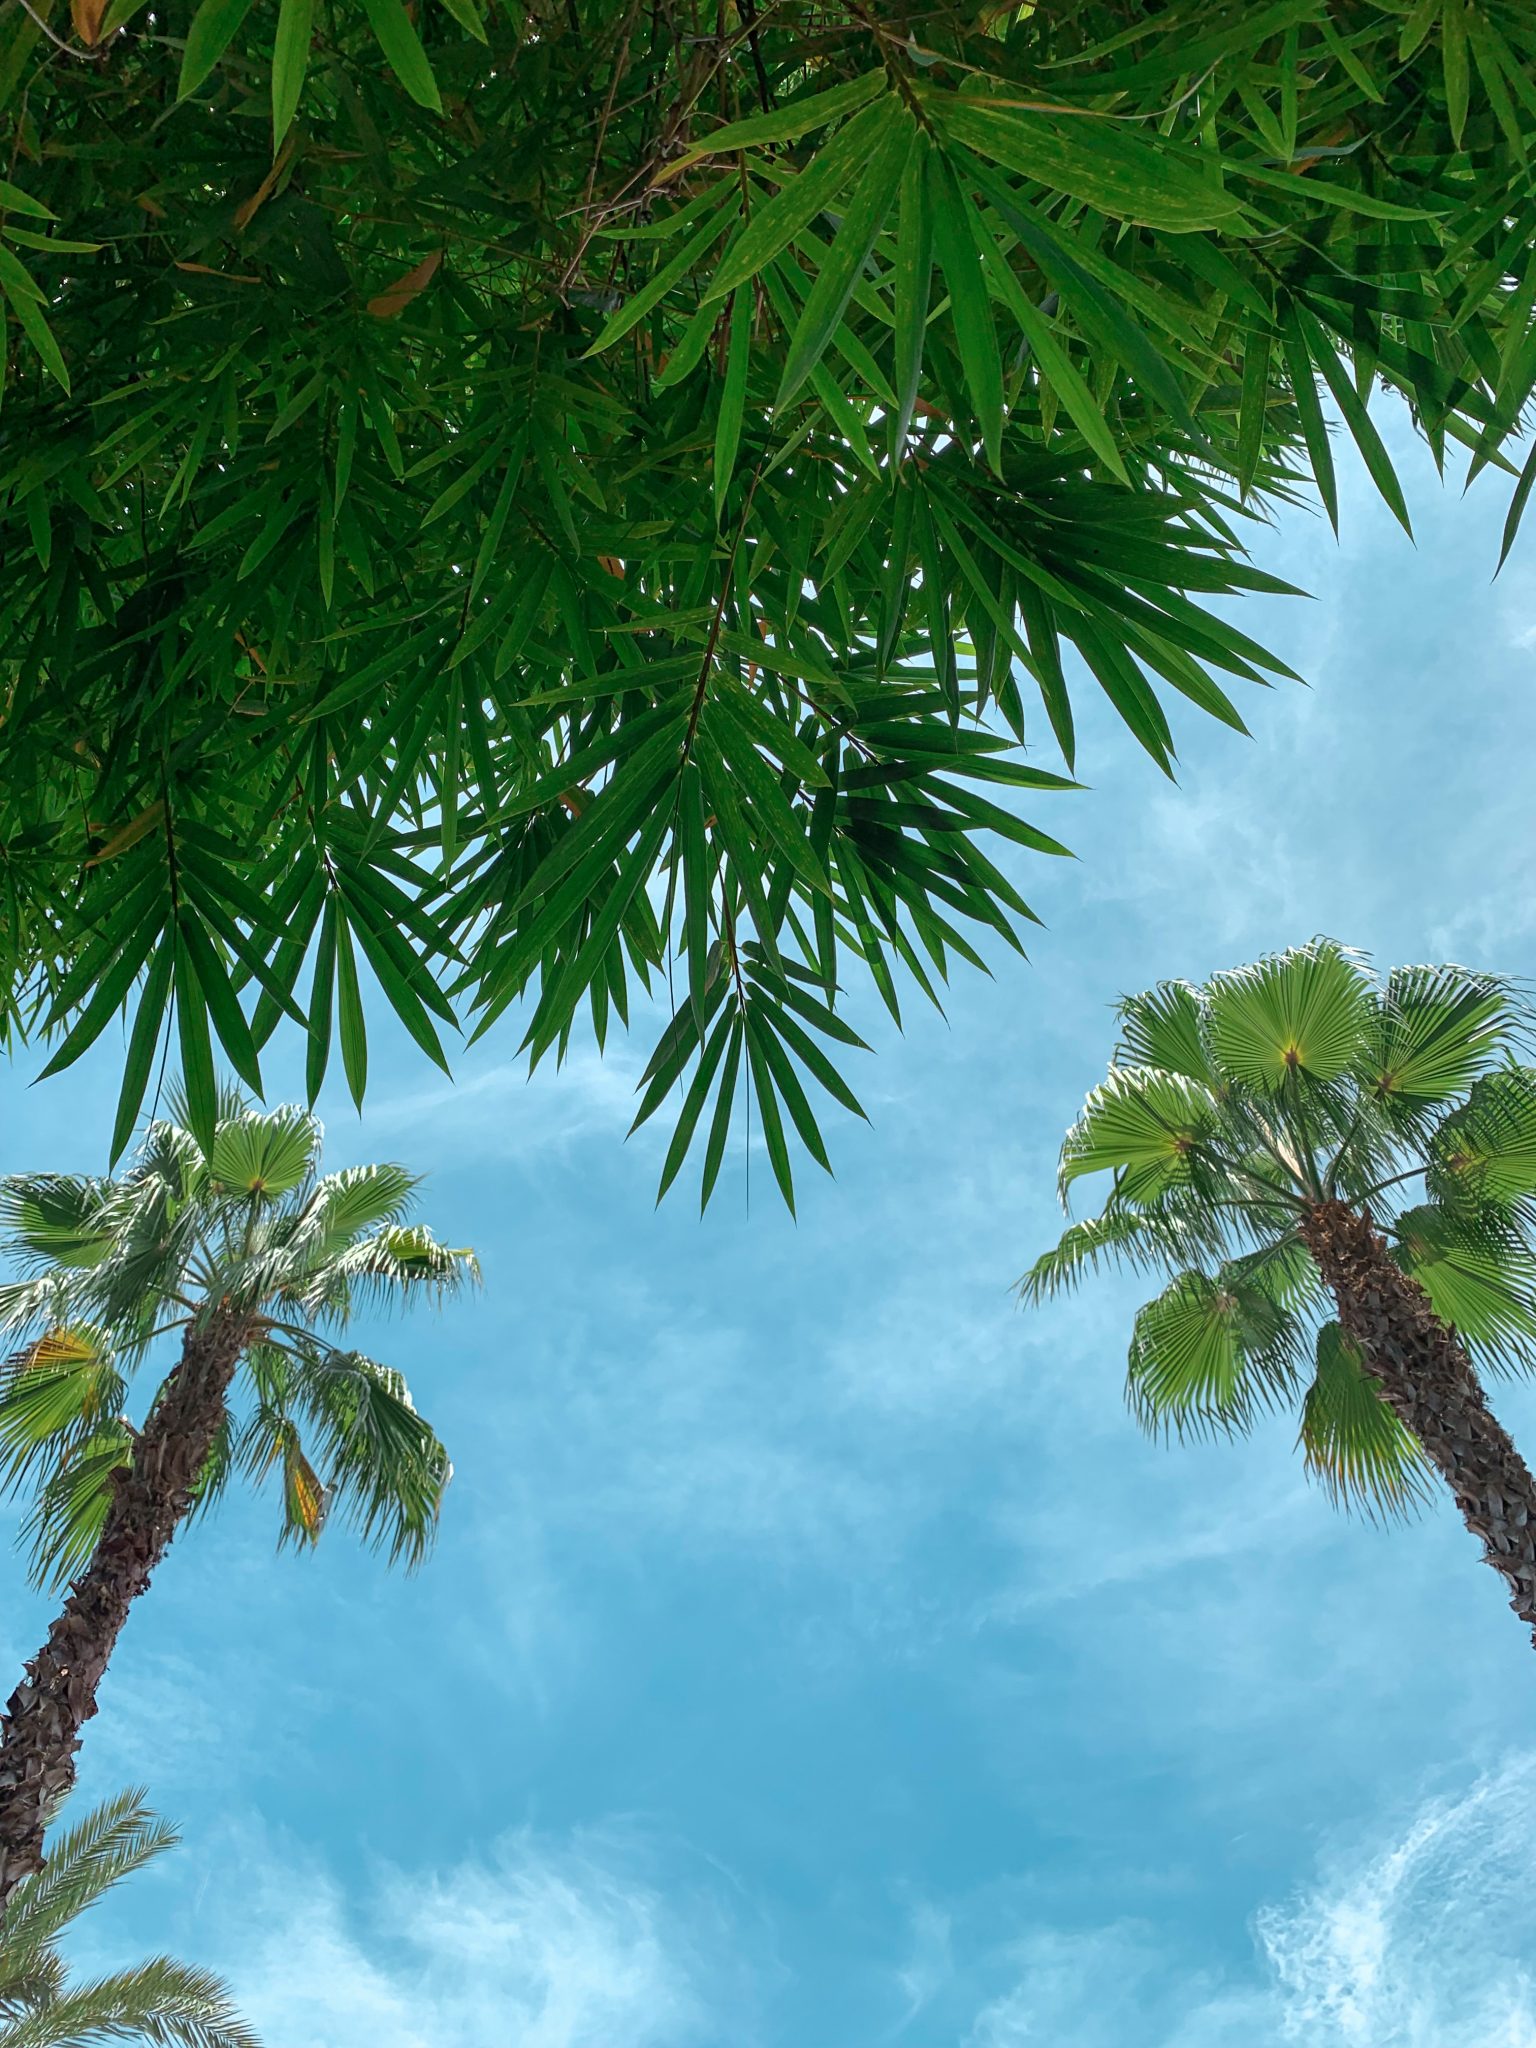 Looking up at the sky underneath palm trees